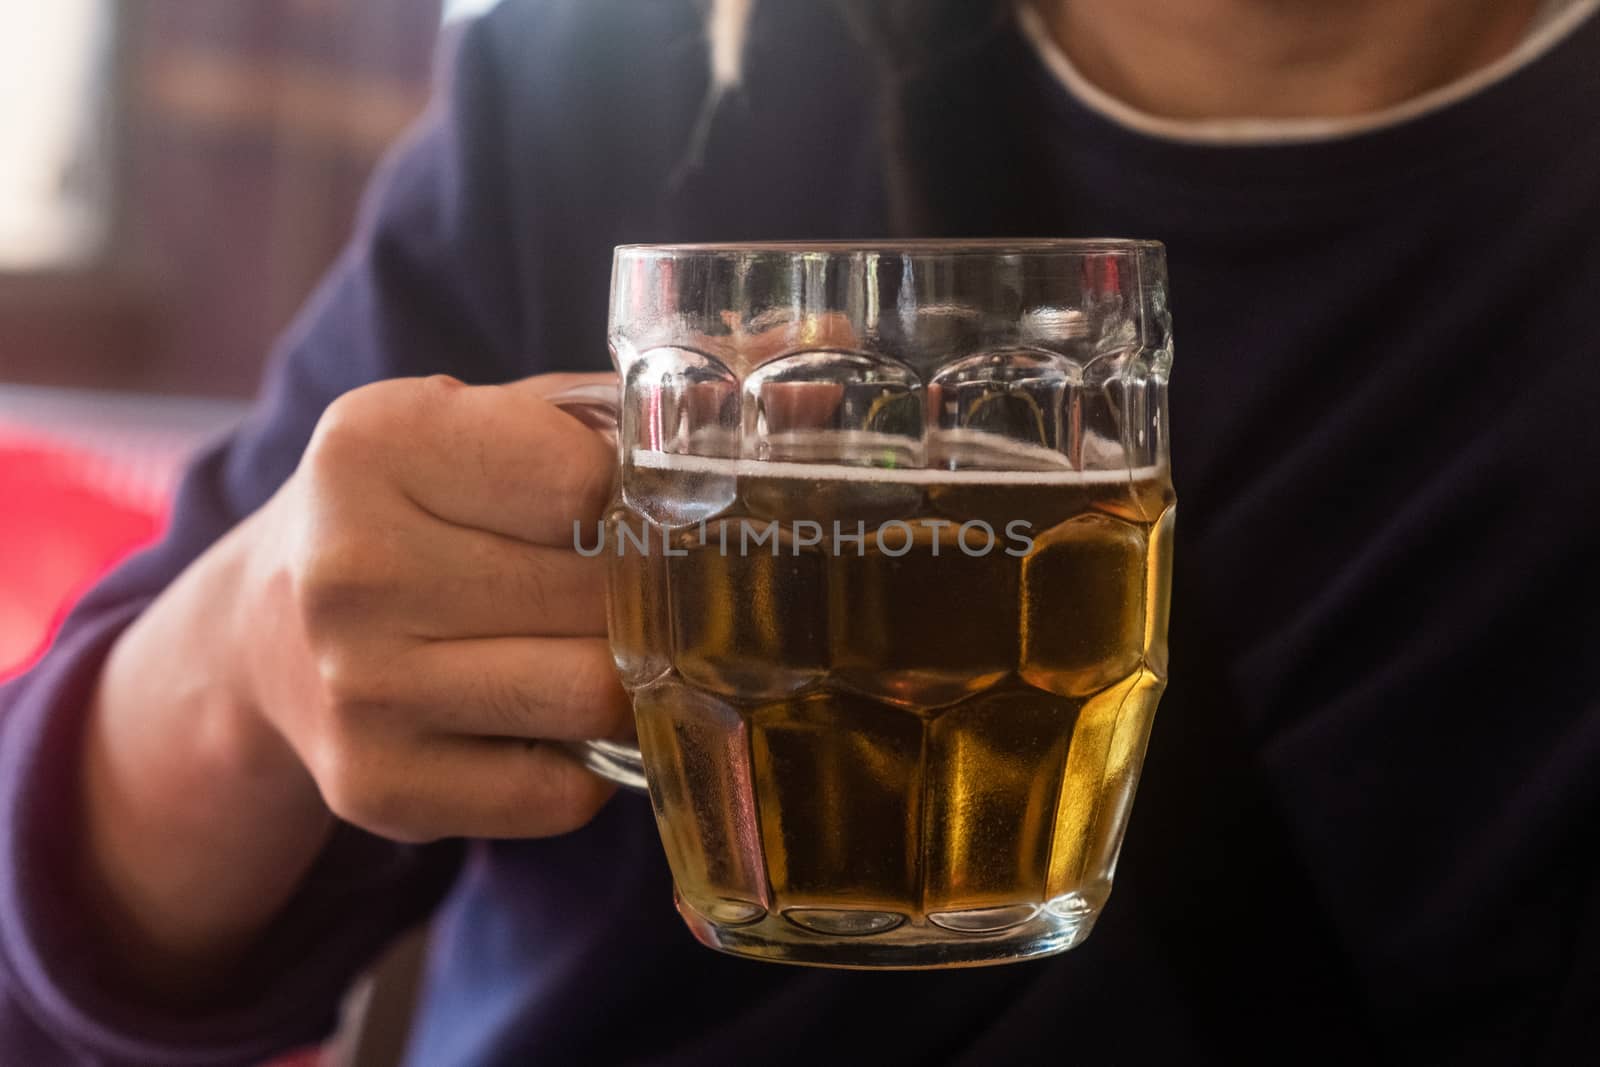 Man drinking traditional pint of real ale beer.